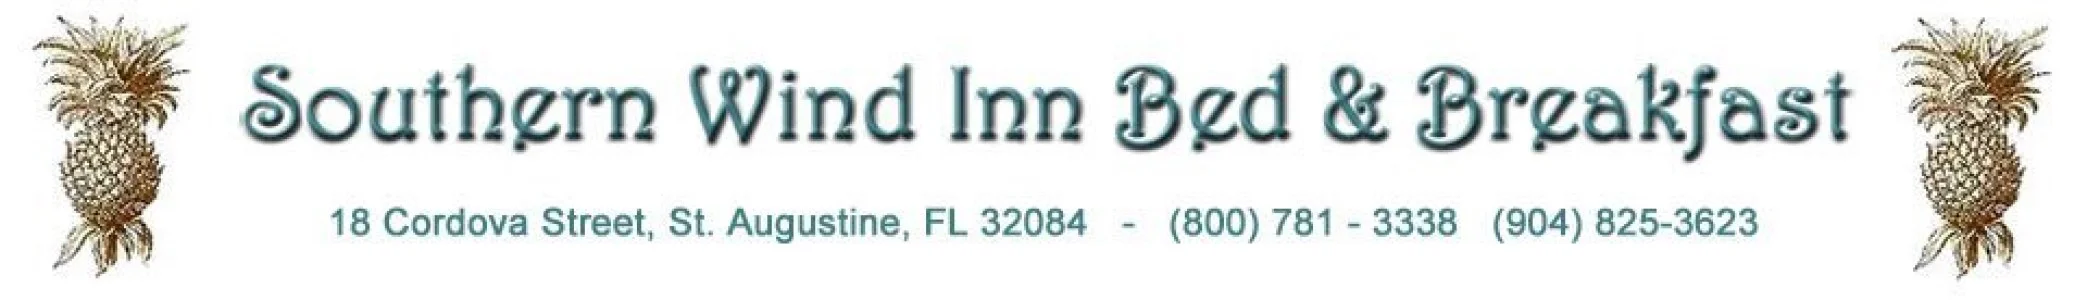 Southern Wind Inn Bed and Breakfast